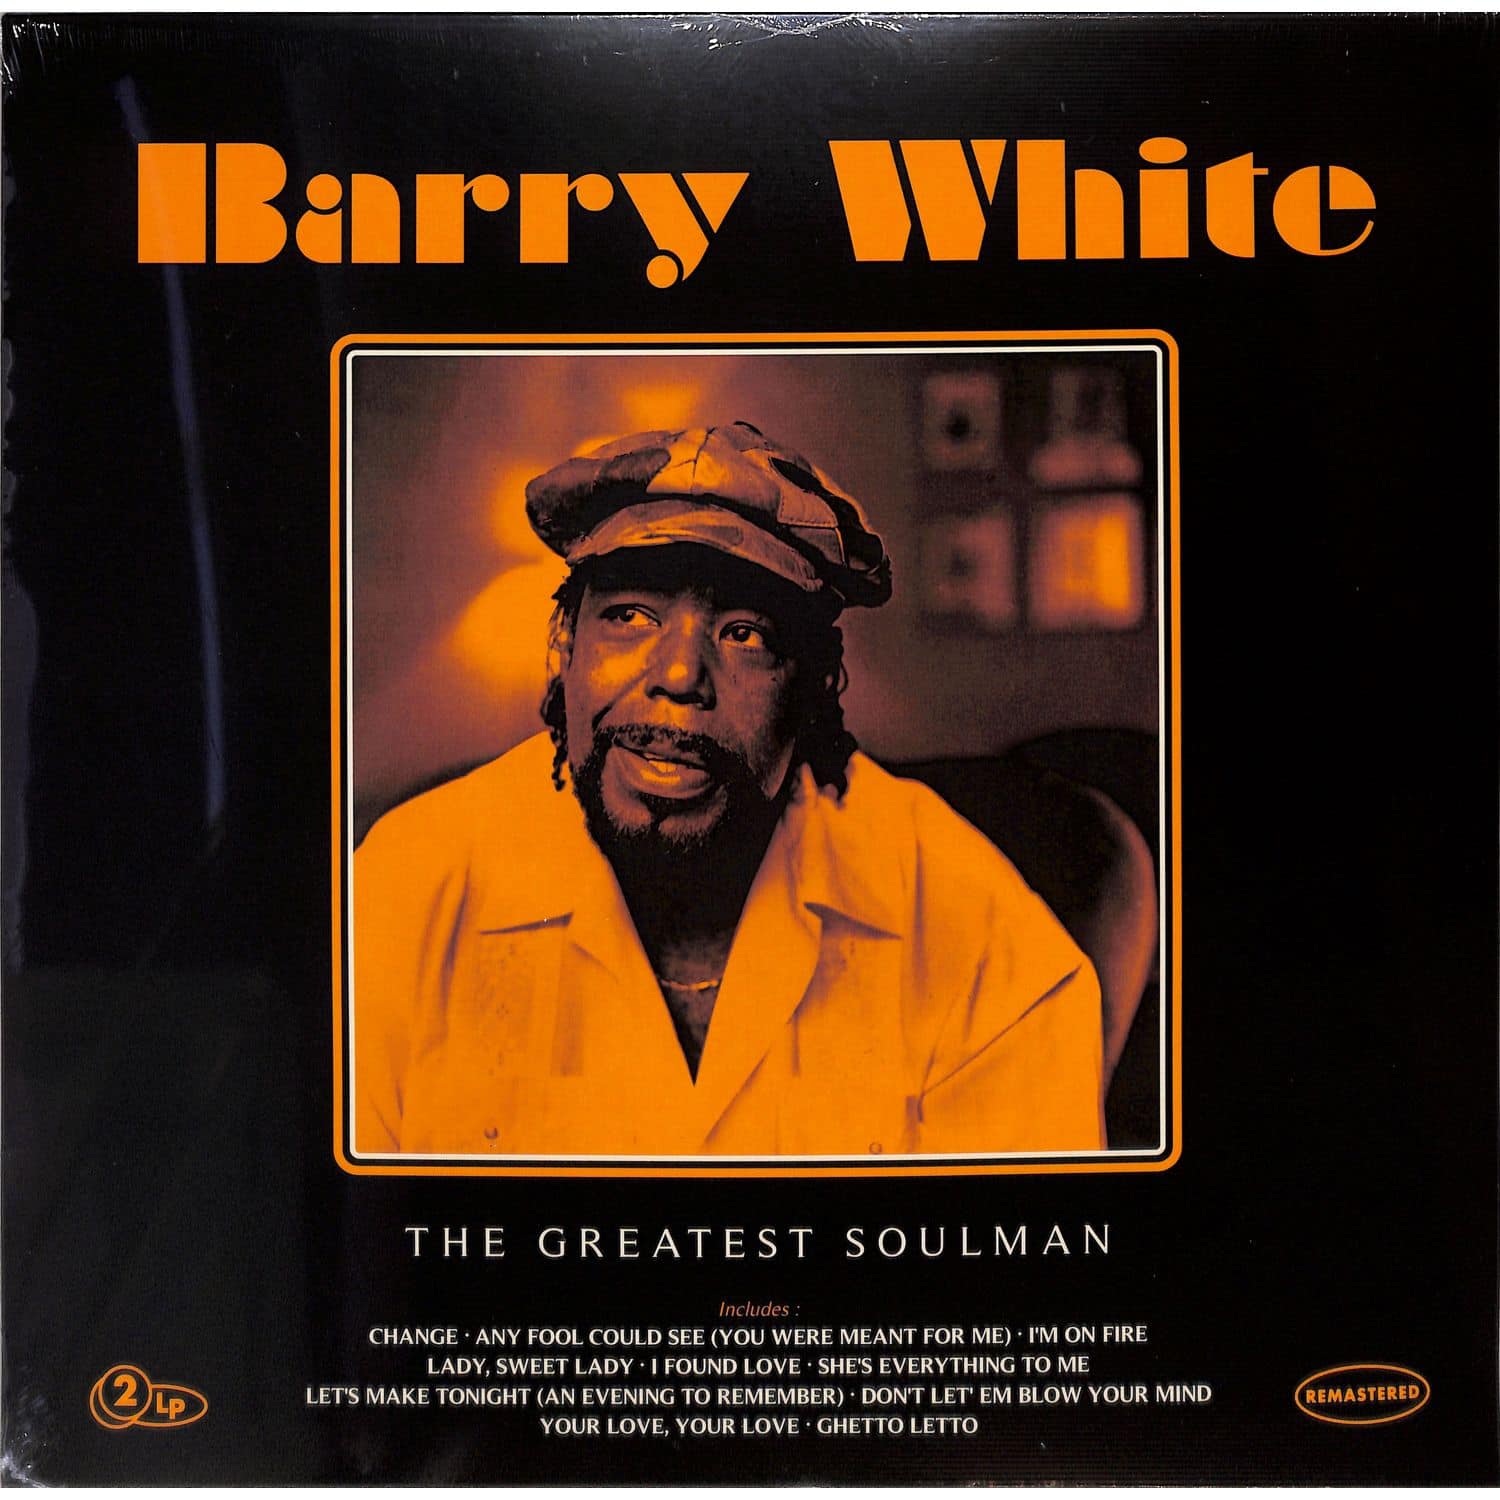 Barry White - THE GREATEST SOULMAN 